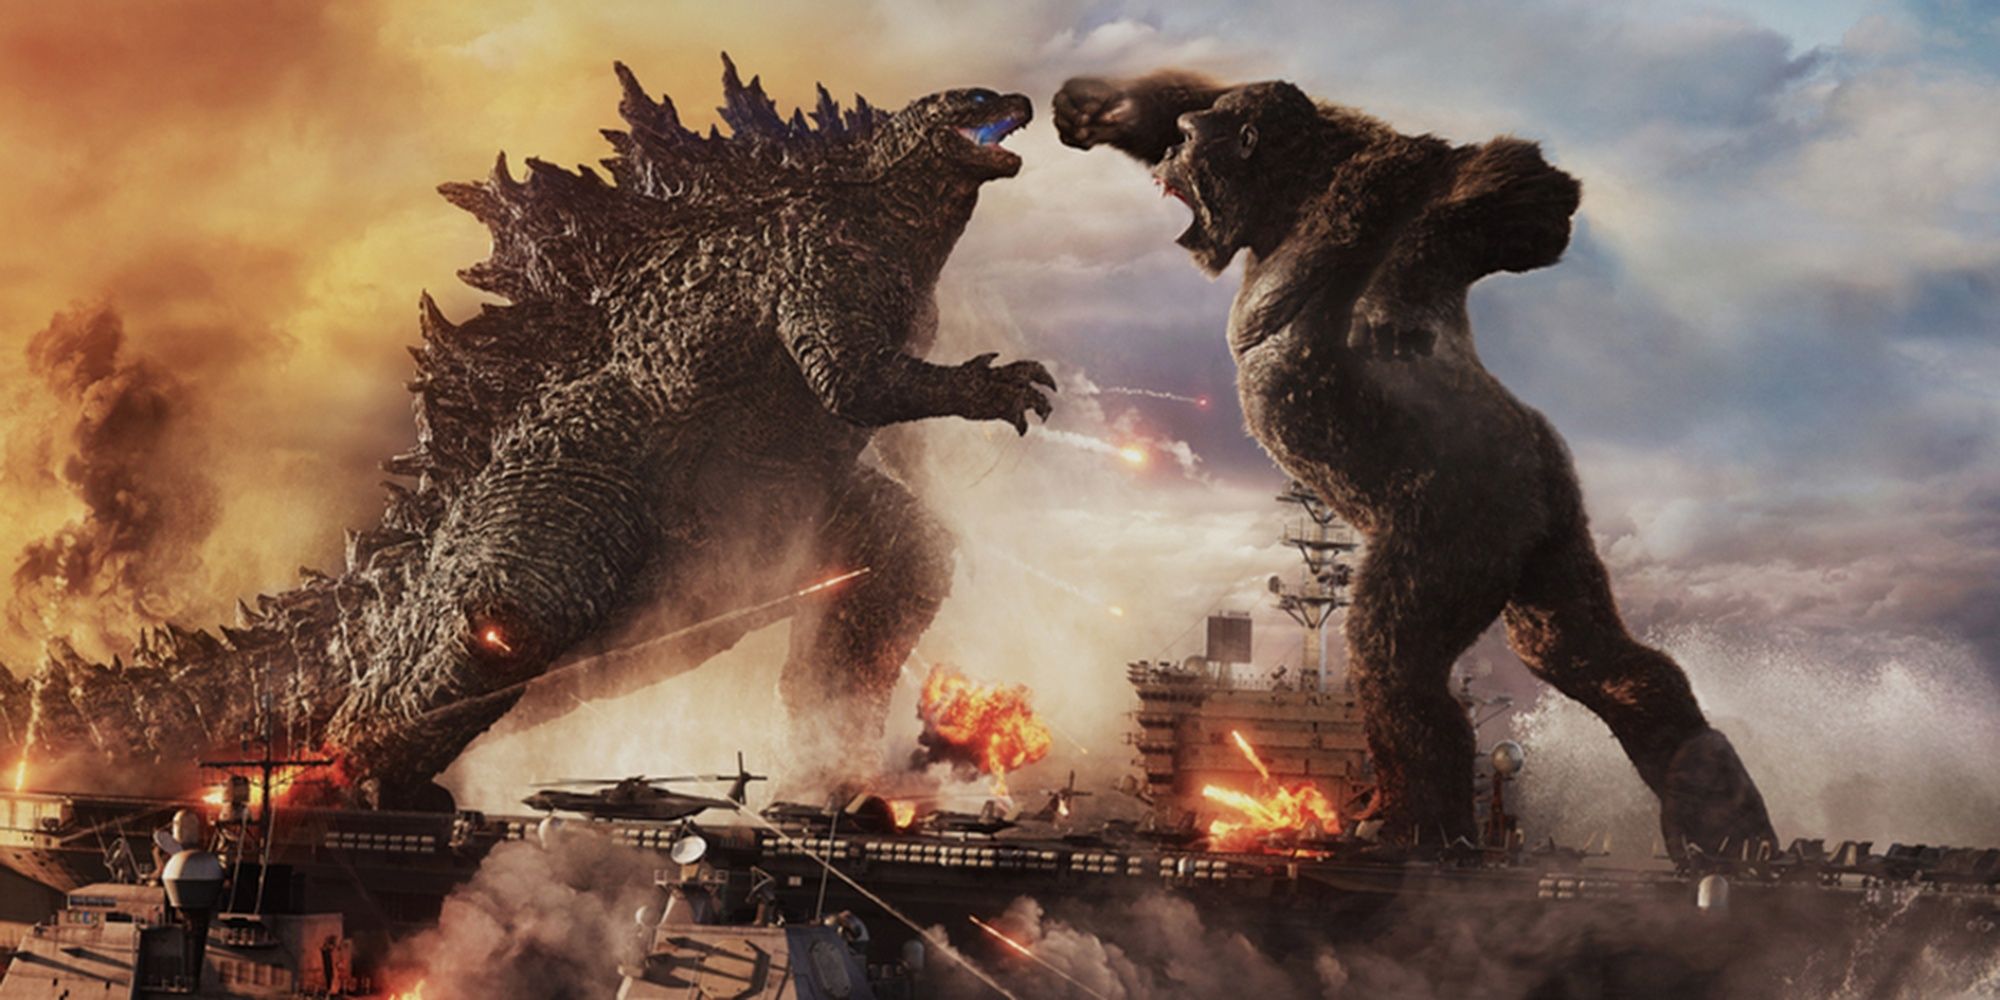 Godzilla X Kong: Godzilla And Kong About To Fight Each Other On An Aircraft Carrier